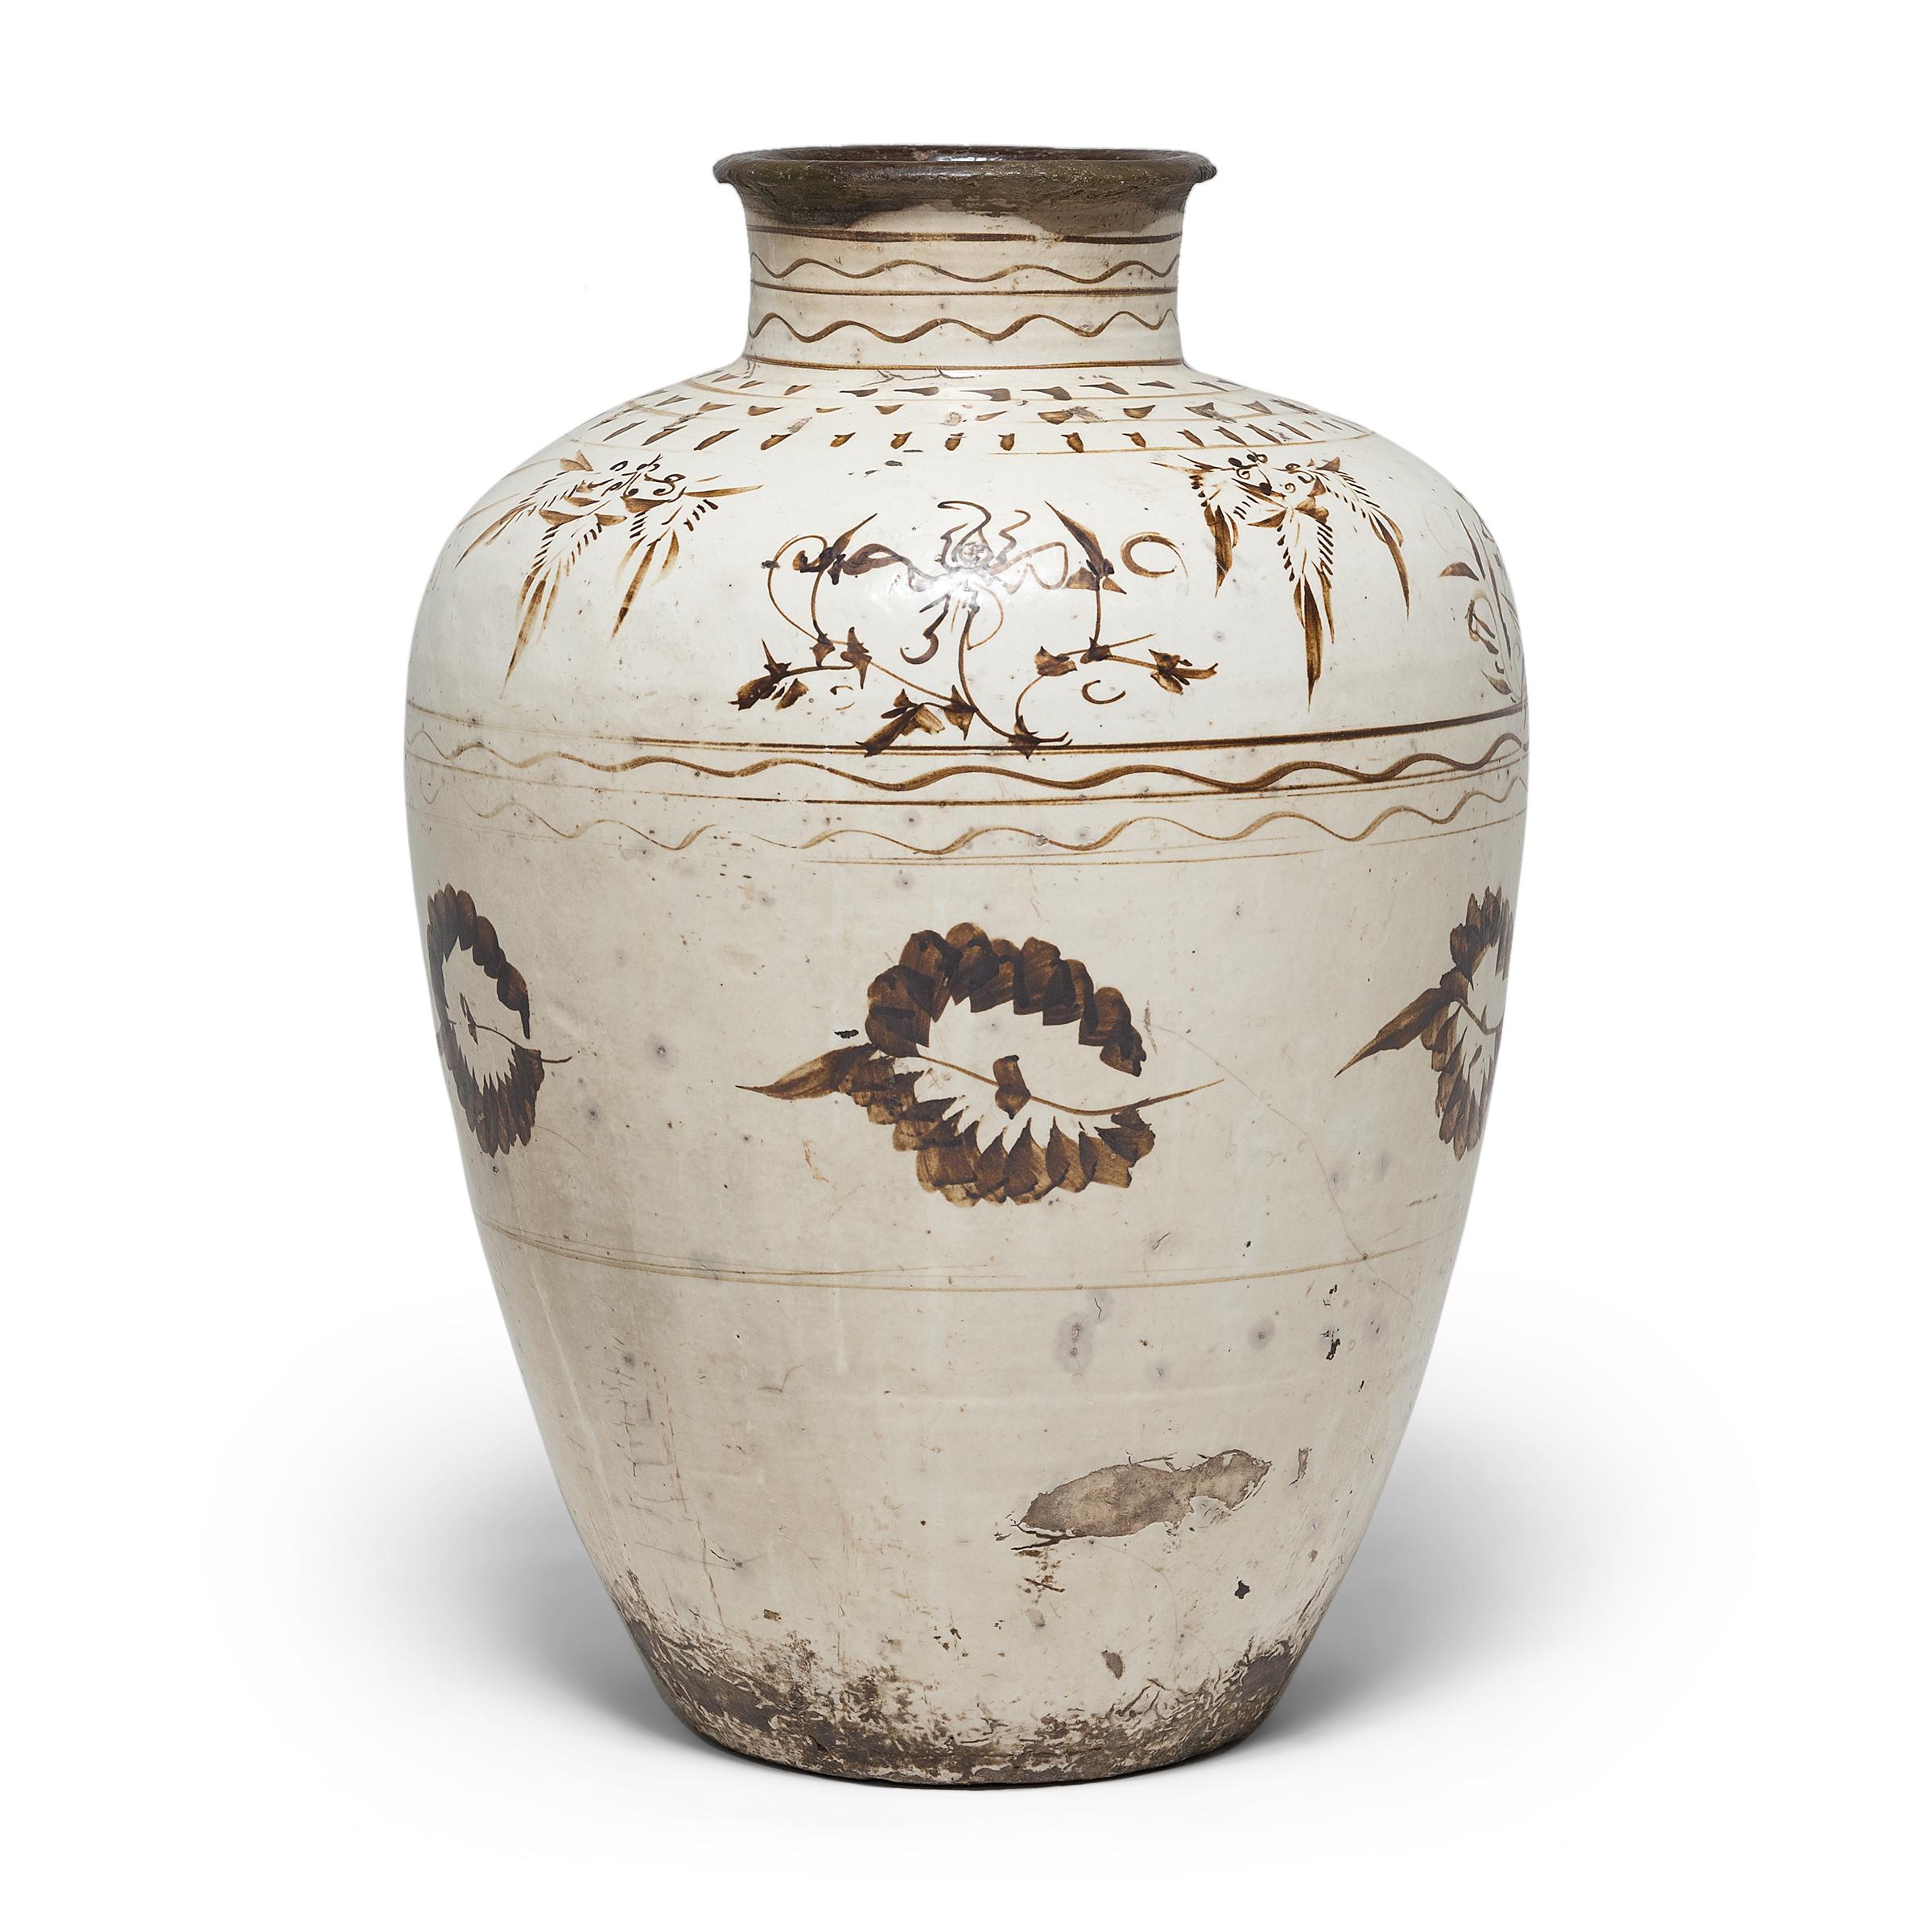 This impressive glazed vessel dates to the early 17th century and was used to store wine and spirits made from rice and other grains. The Ming-dynasty jar has an elegant, tapered form and is beautifully glazed with neutral earth-tones in a style